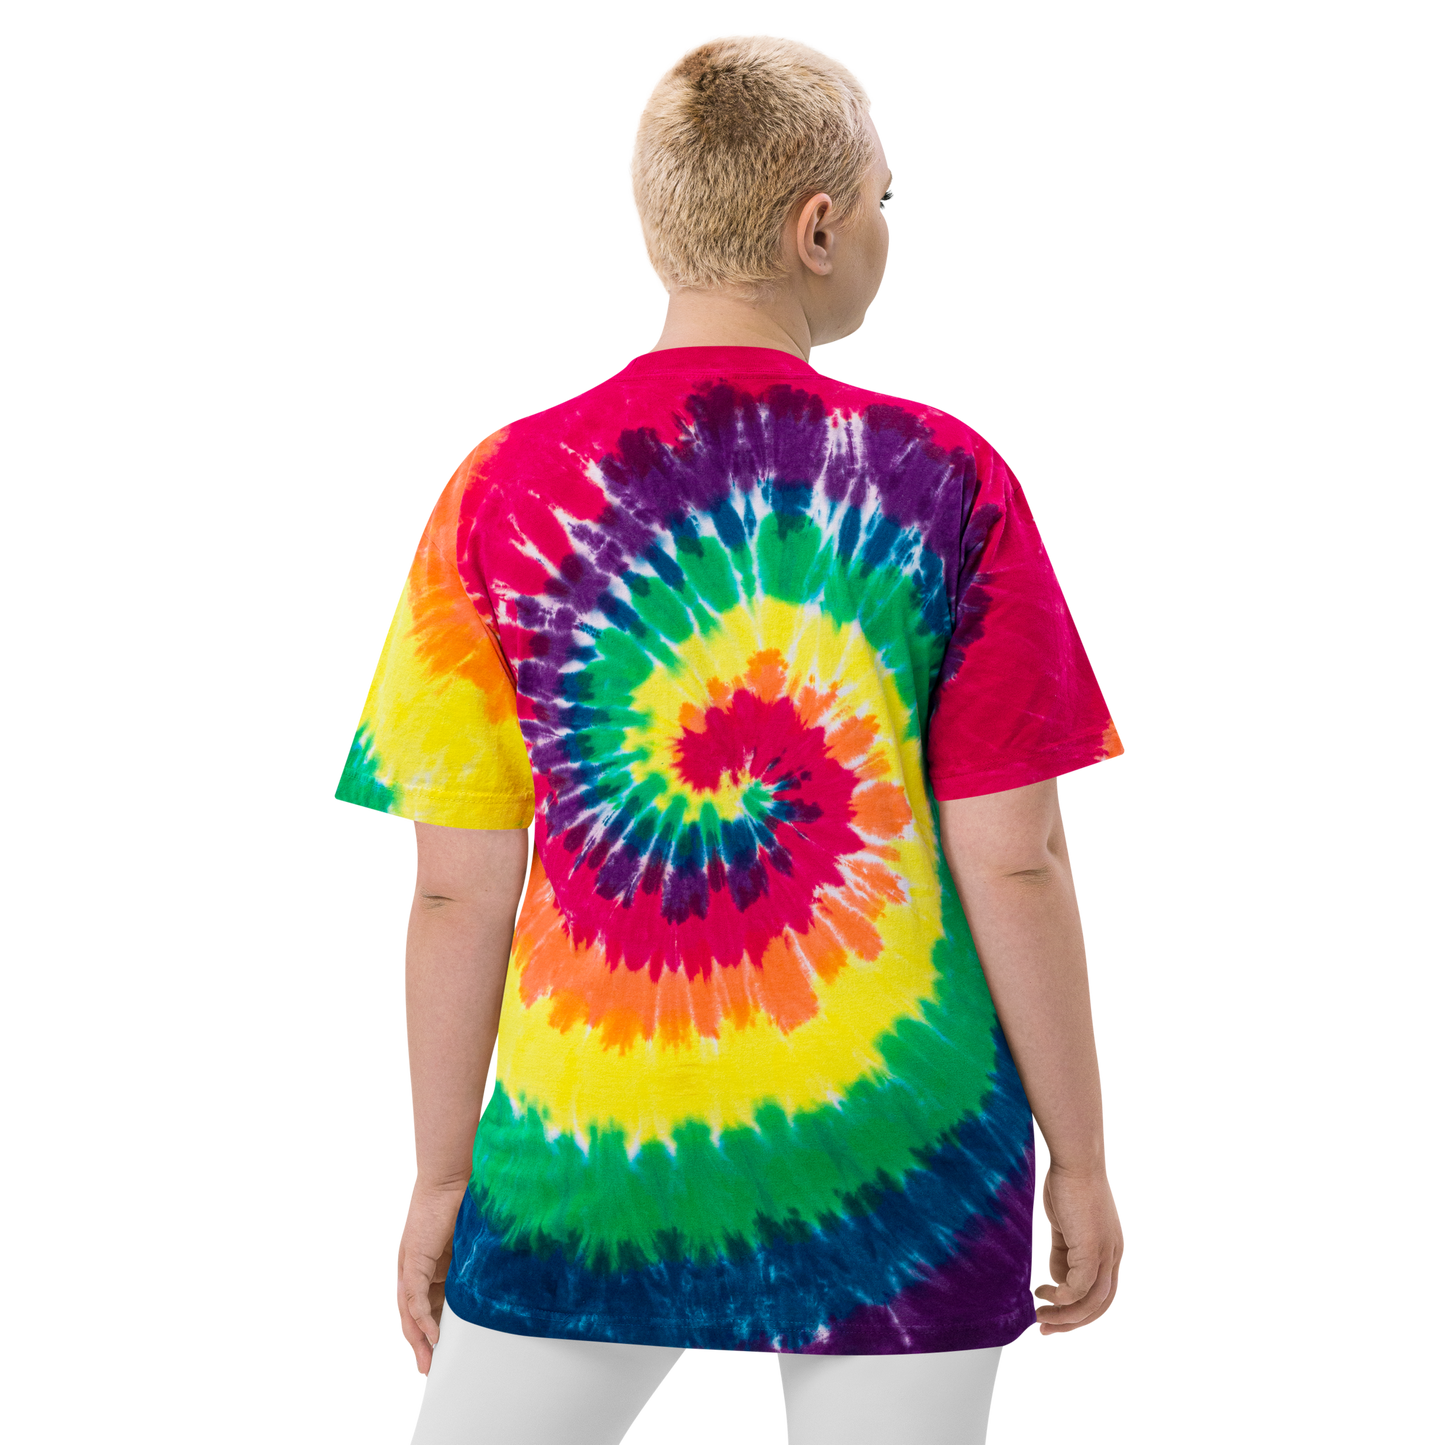 YHM Designs - YQT Thunder Bay Oversized Tie-Dye T-Shirt - Crossed-X Design with Airport Code and Vintage Propliner - White Embroidery - Image 14